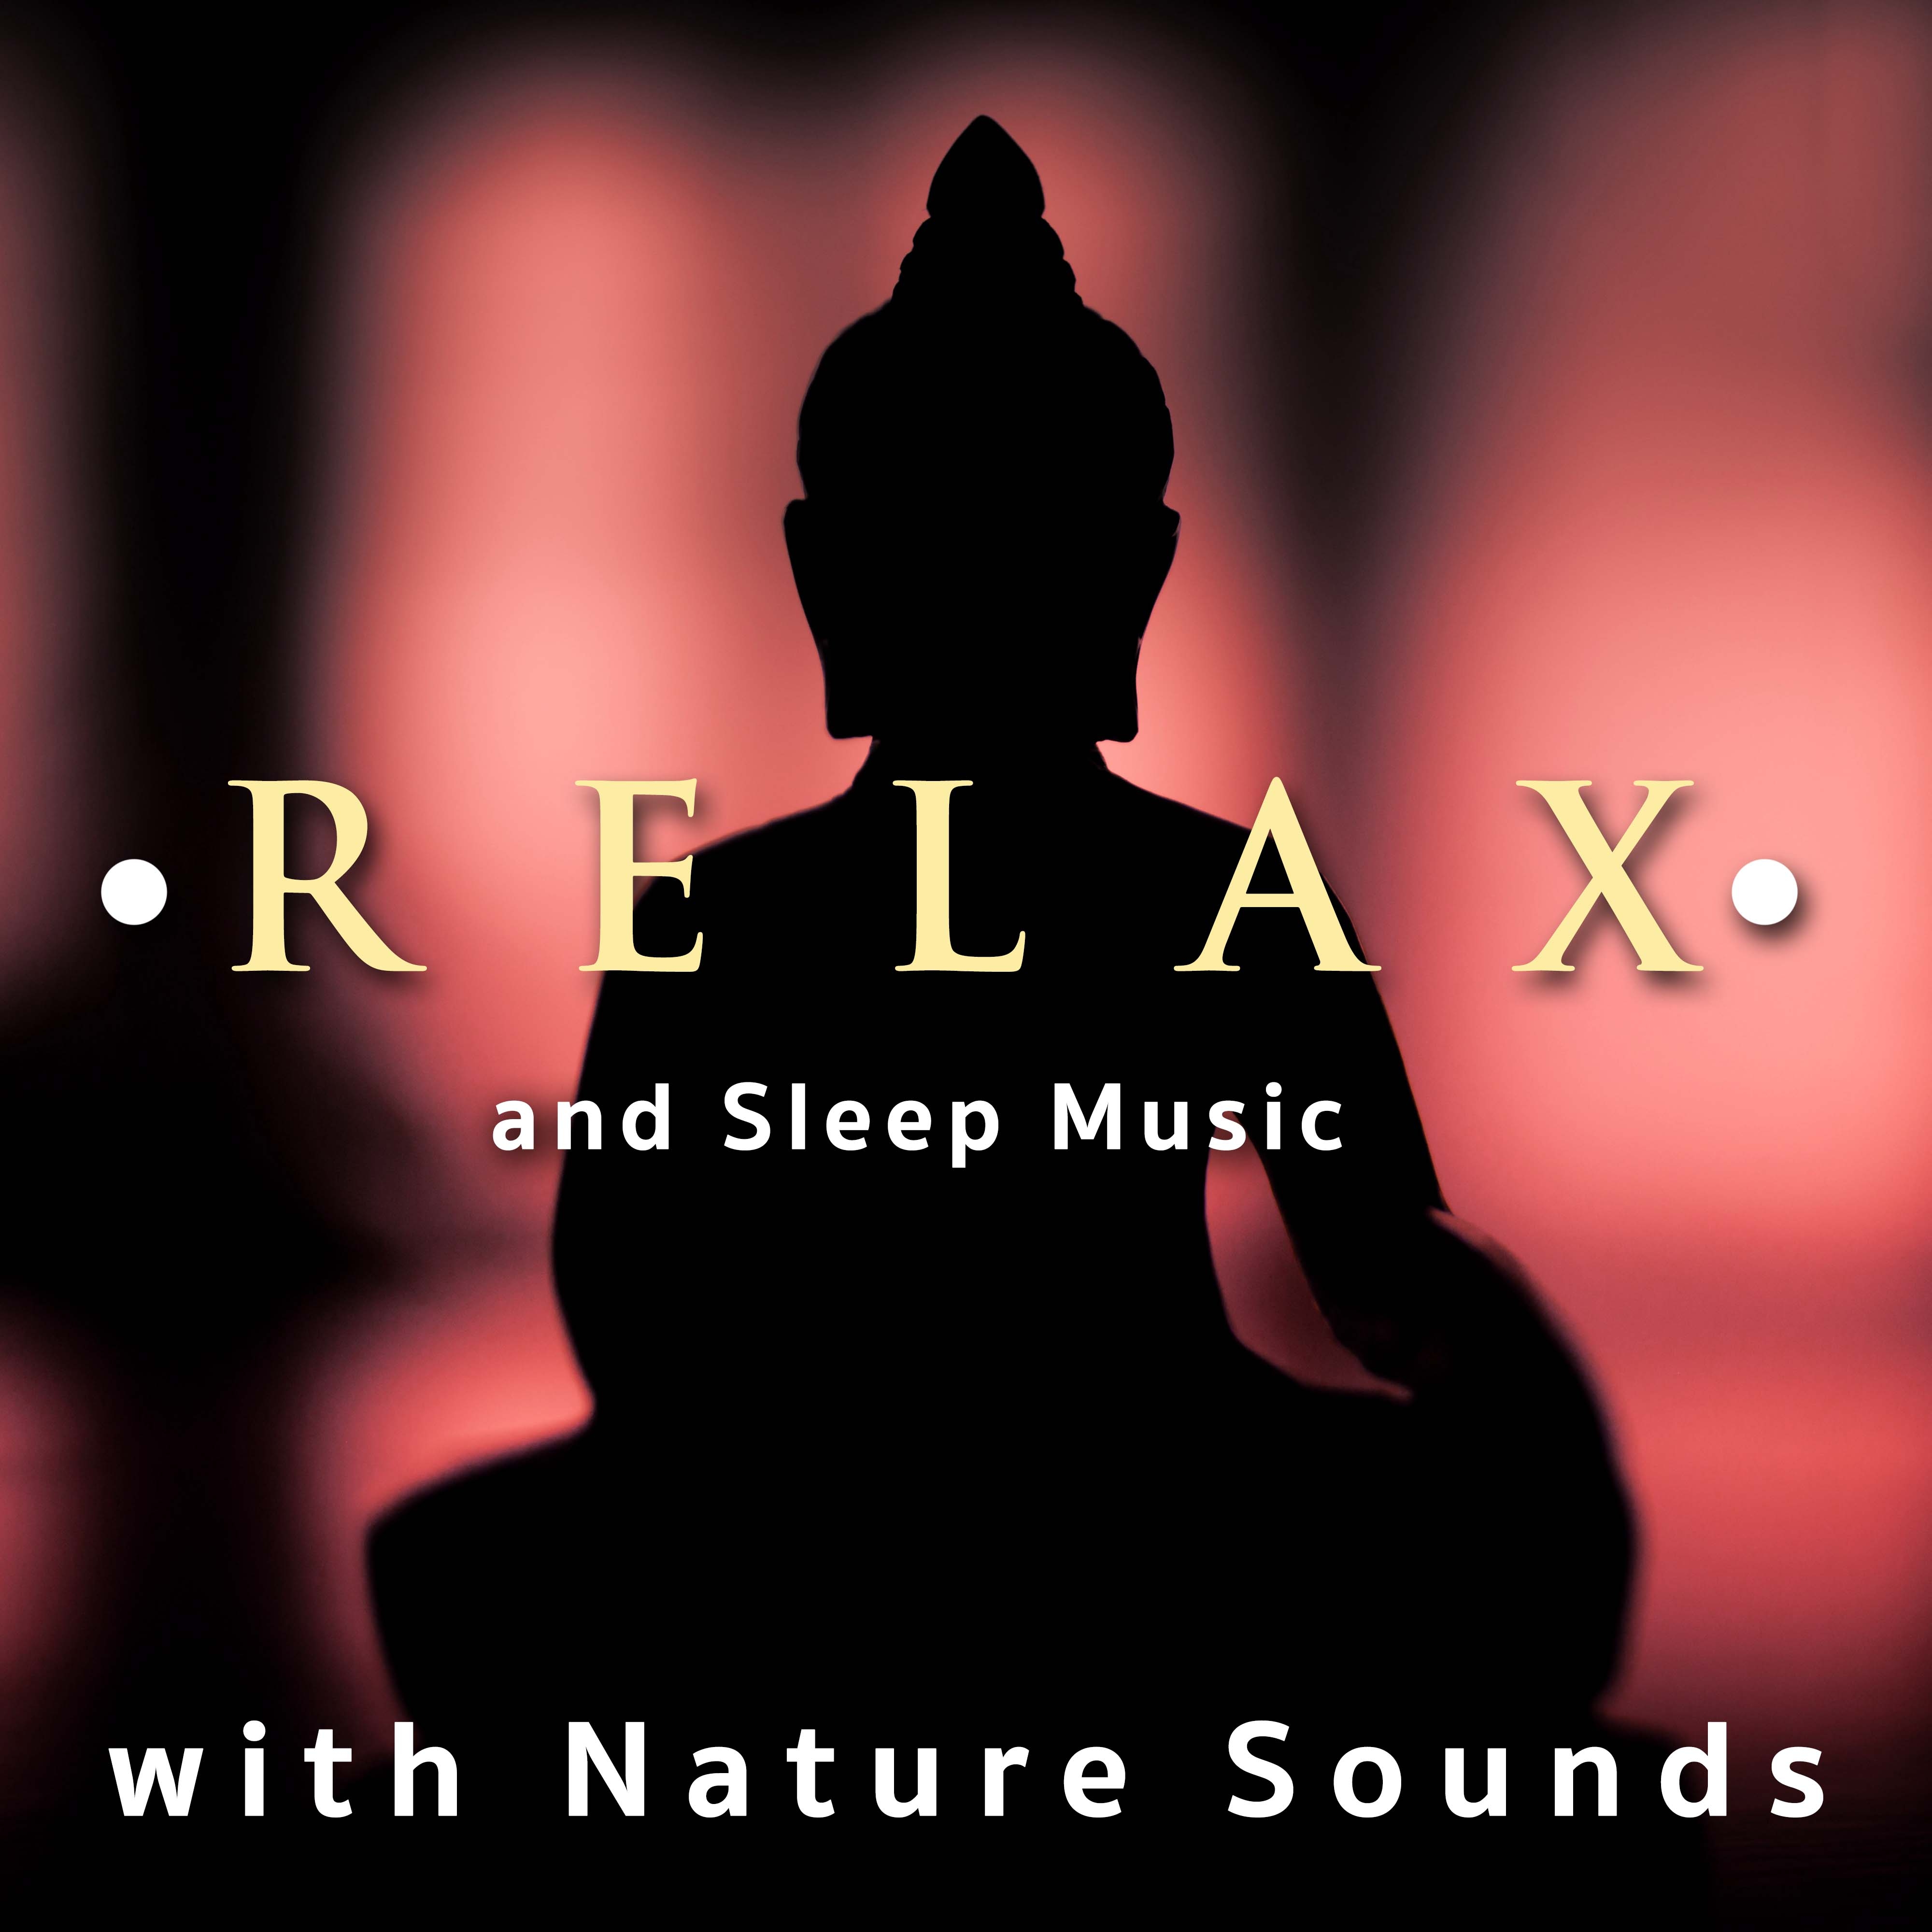 Relax and Sleep Music with Nature Sounds: Natural White Noise and Sounds of Nature for Deep Sleep for Insomnia. Lullabies for Relaxation, Massage, Meditation and Yoga